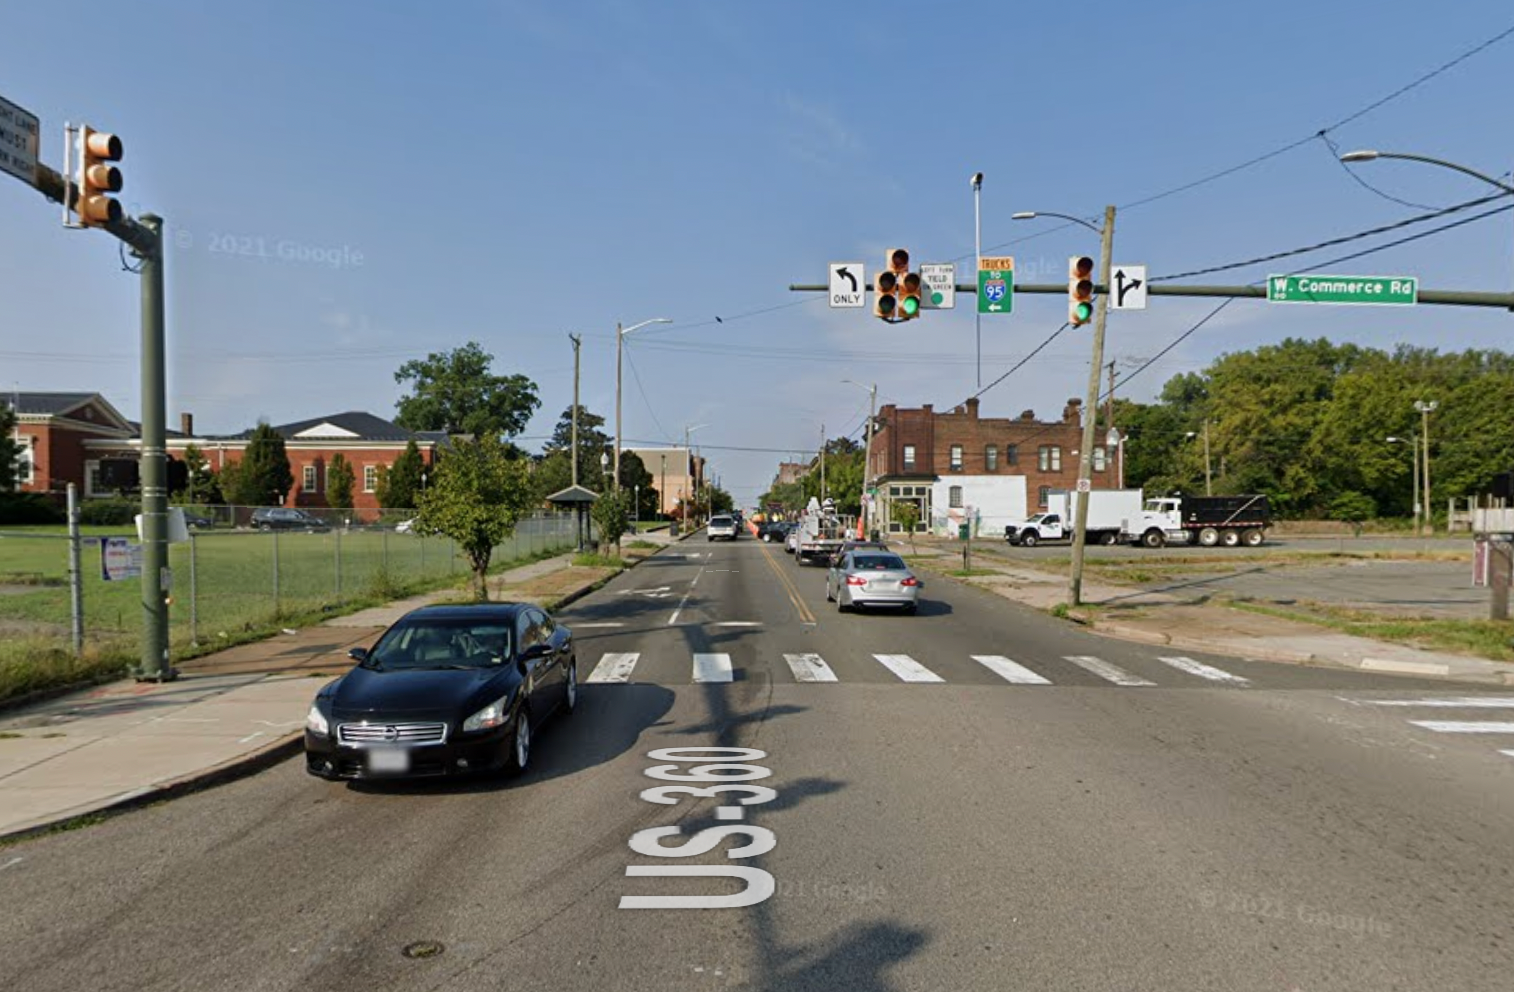 street view of Commerce Road and Hull Street Rd from google maps